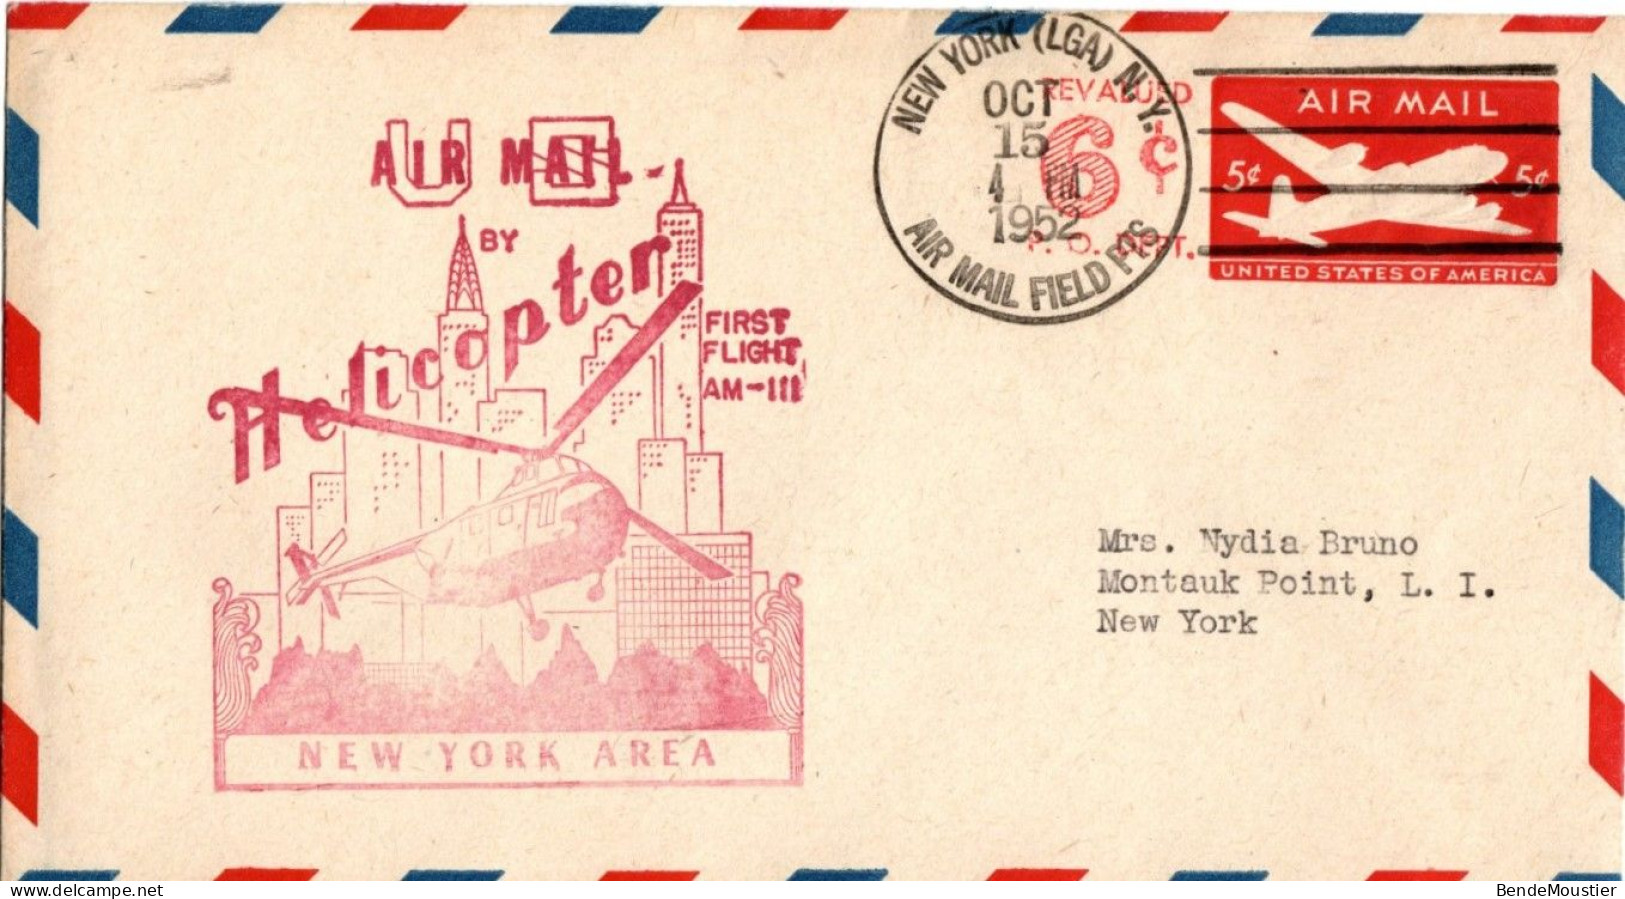 (N62) USA SCOTT # UC19 - Air Mail Helicopter - First Flight AM III - New York (LGA) N.Y. Air Mail Field PTS - 1952 - 2c. 1941-1960 Covers